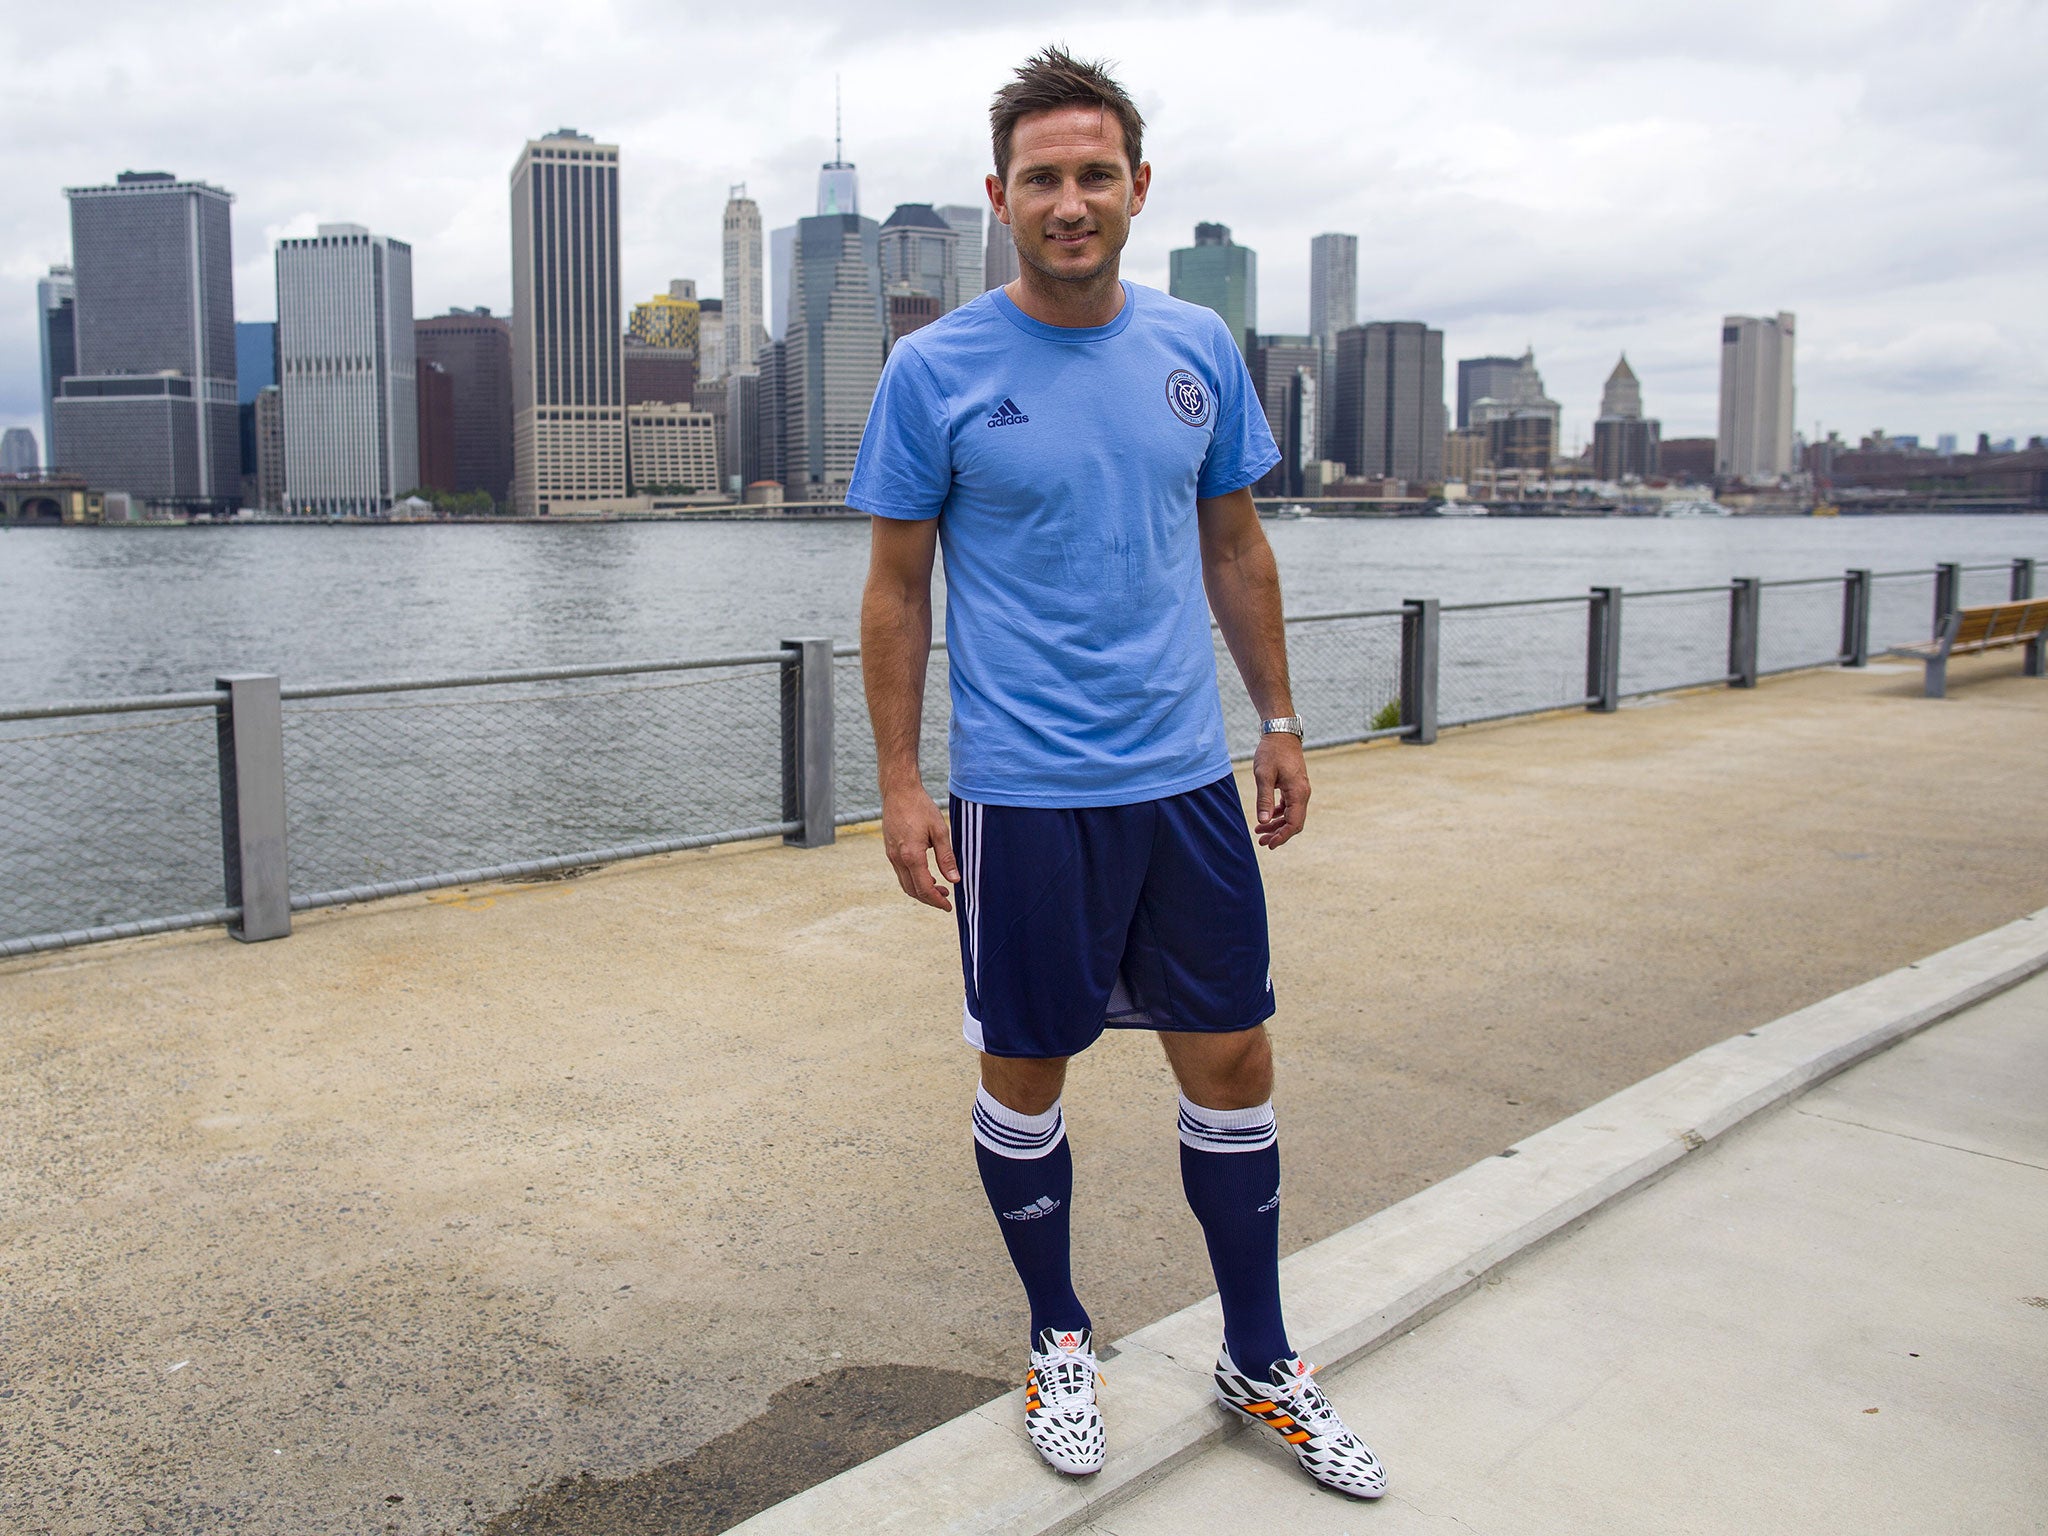 Frank Lampard will pass Billy Wright and equal Bobby Charton’s caps tally of 106 caps against